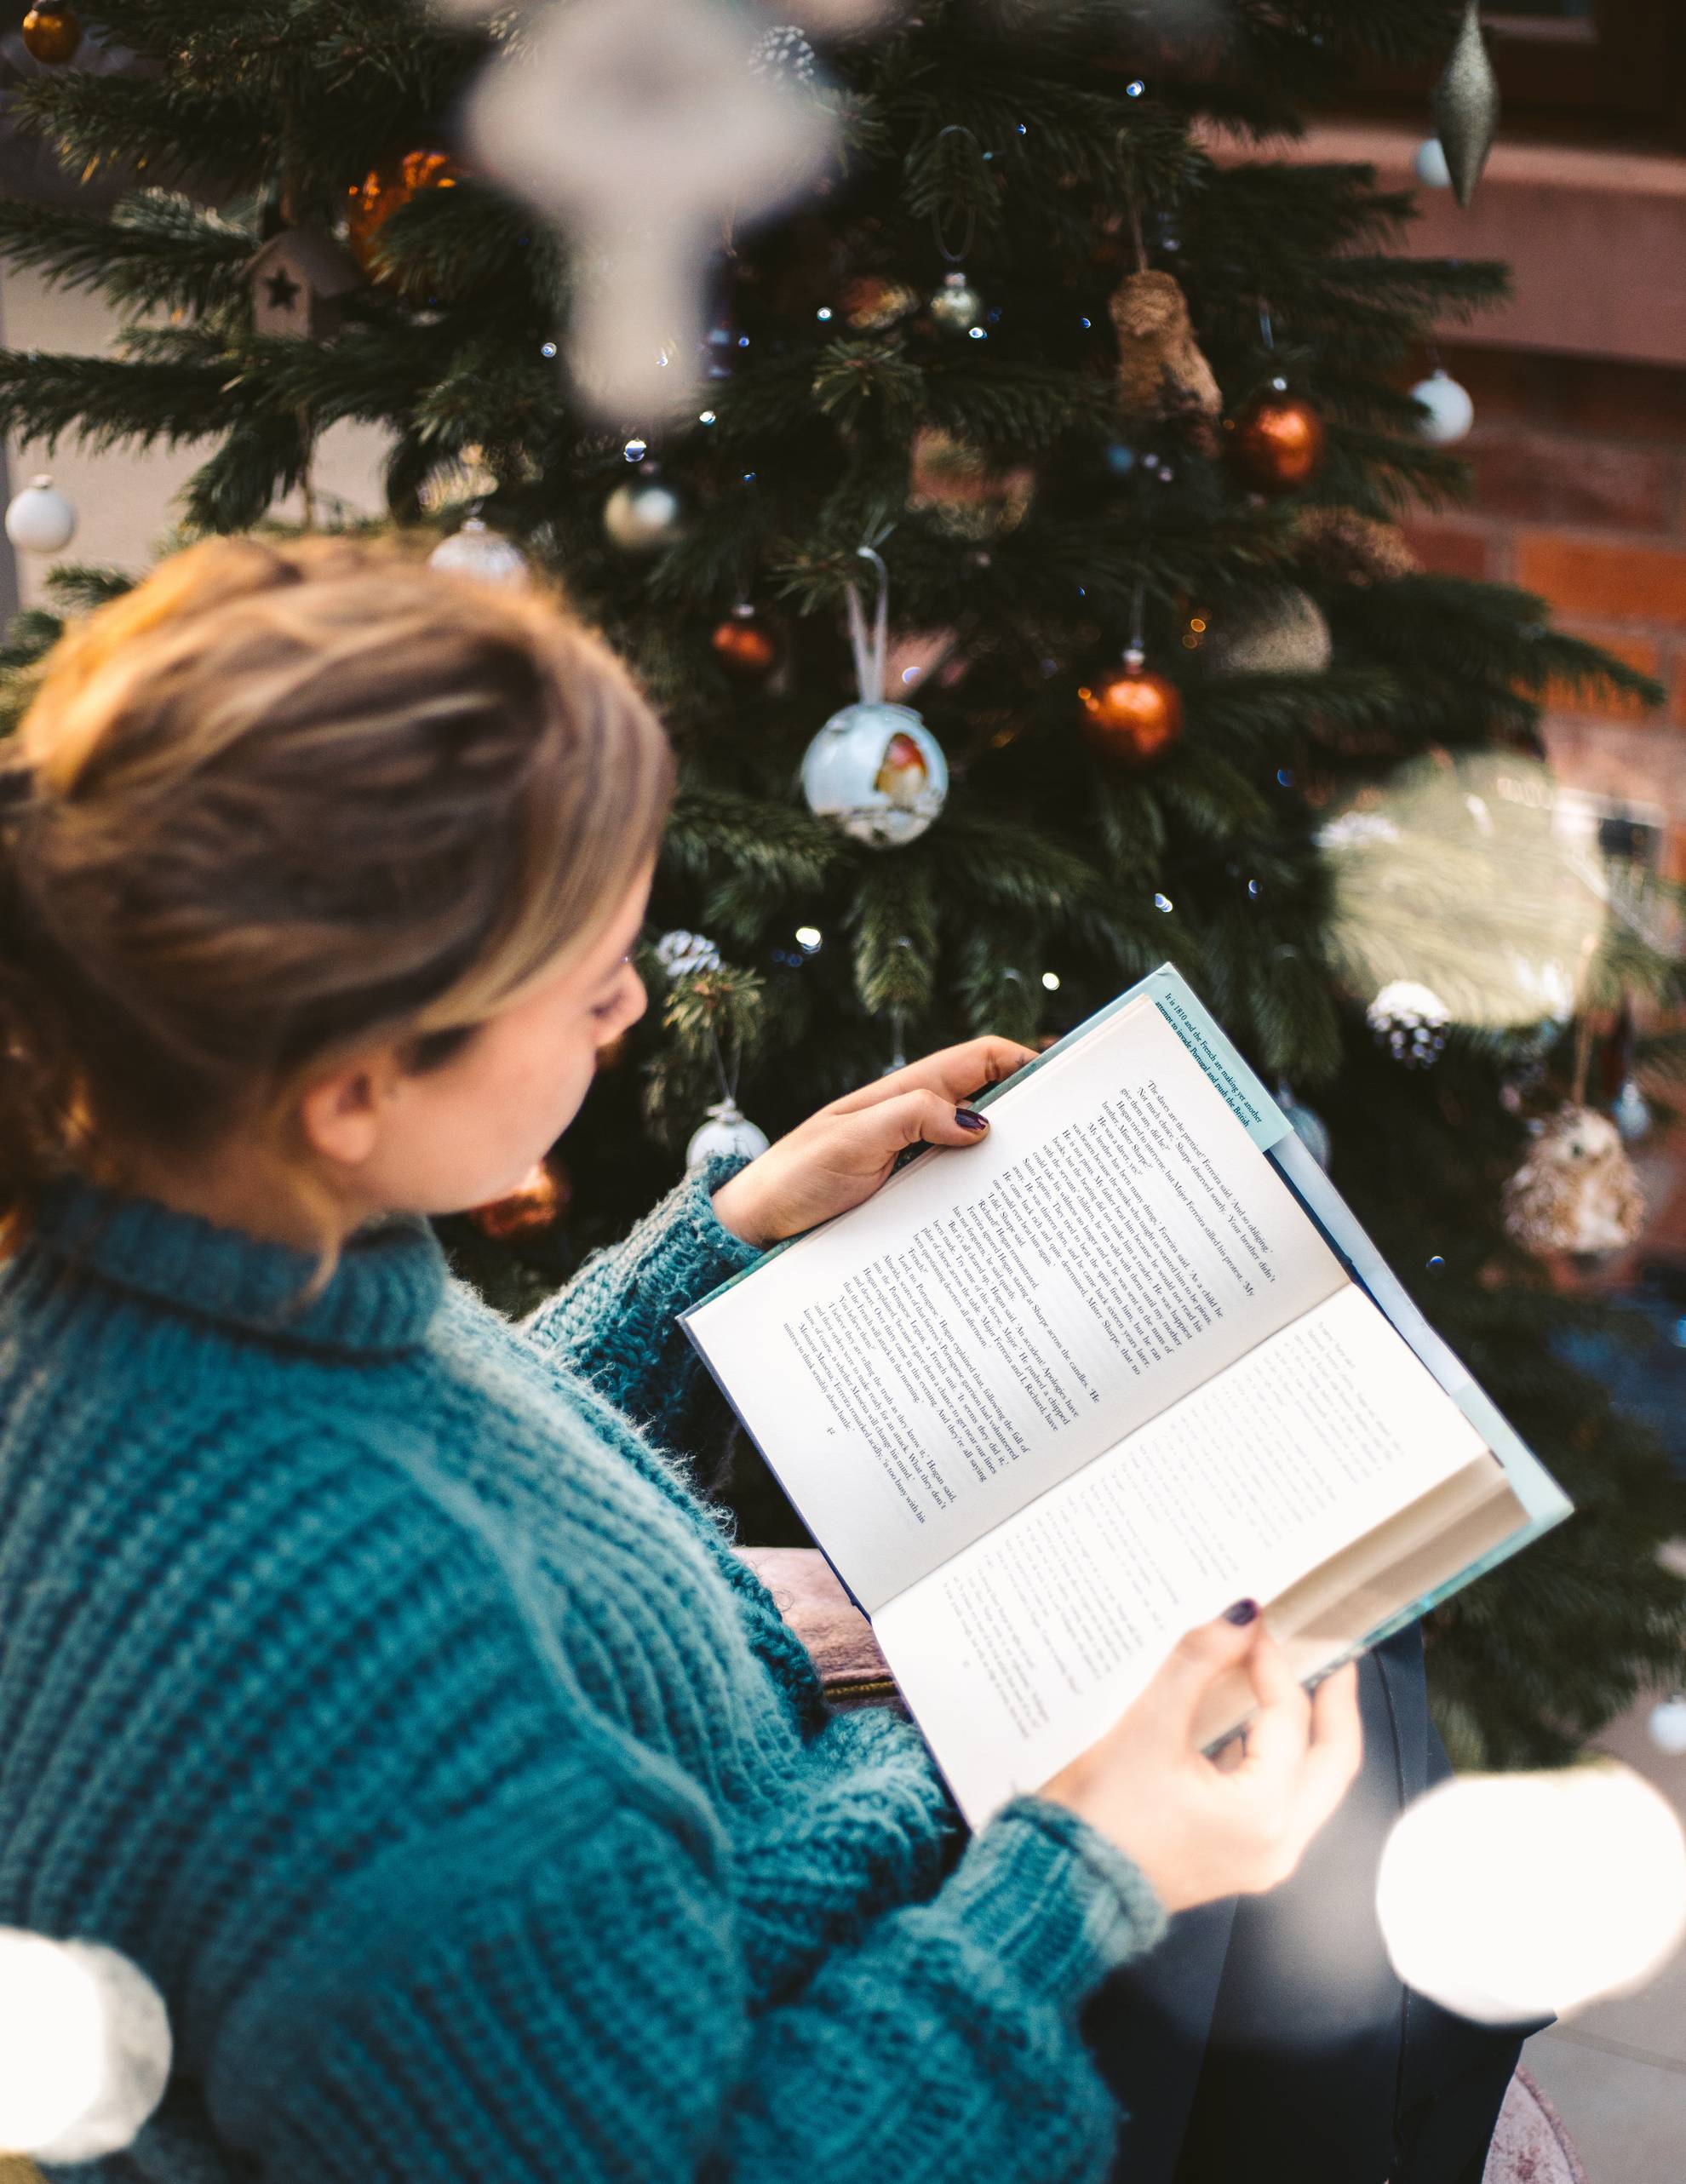 make time for journaling or reflection during your first christmas after loss